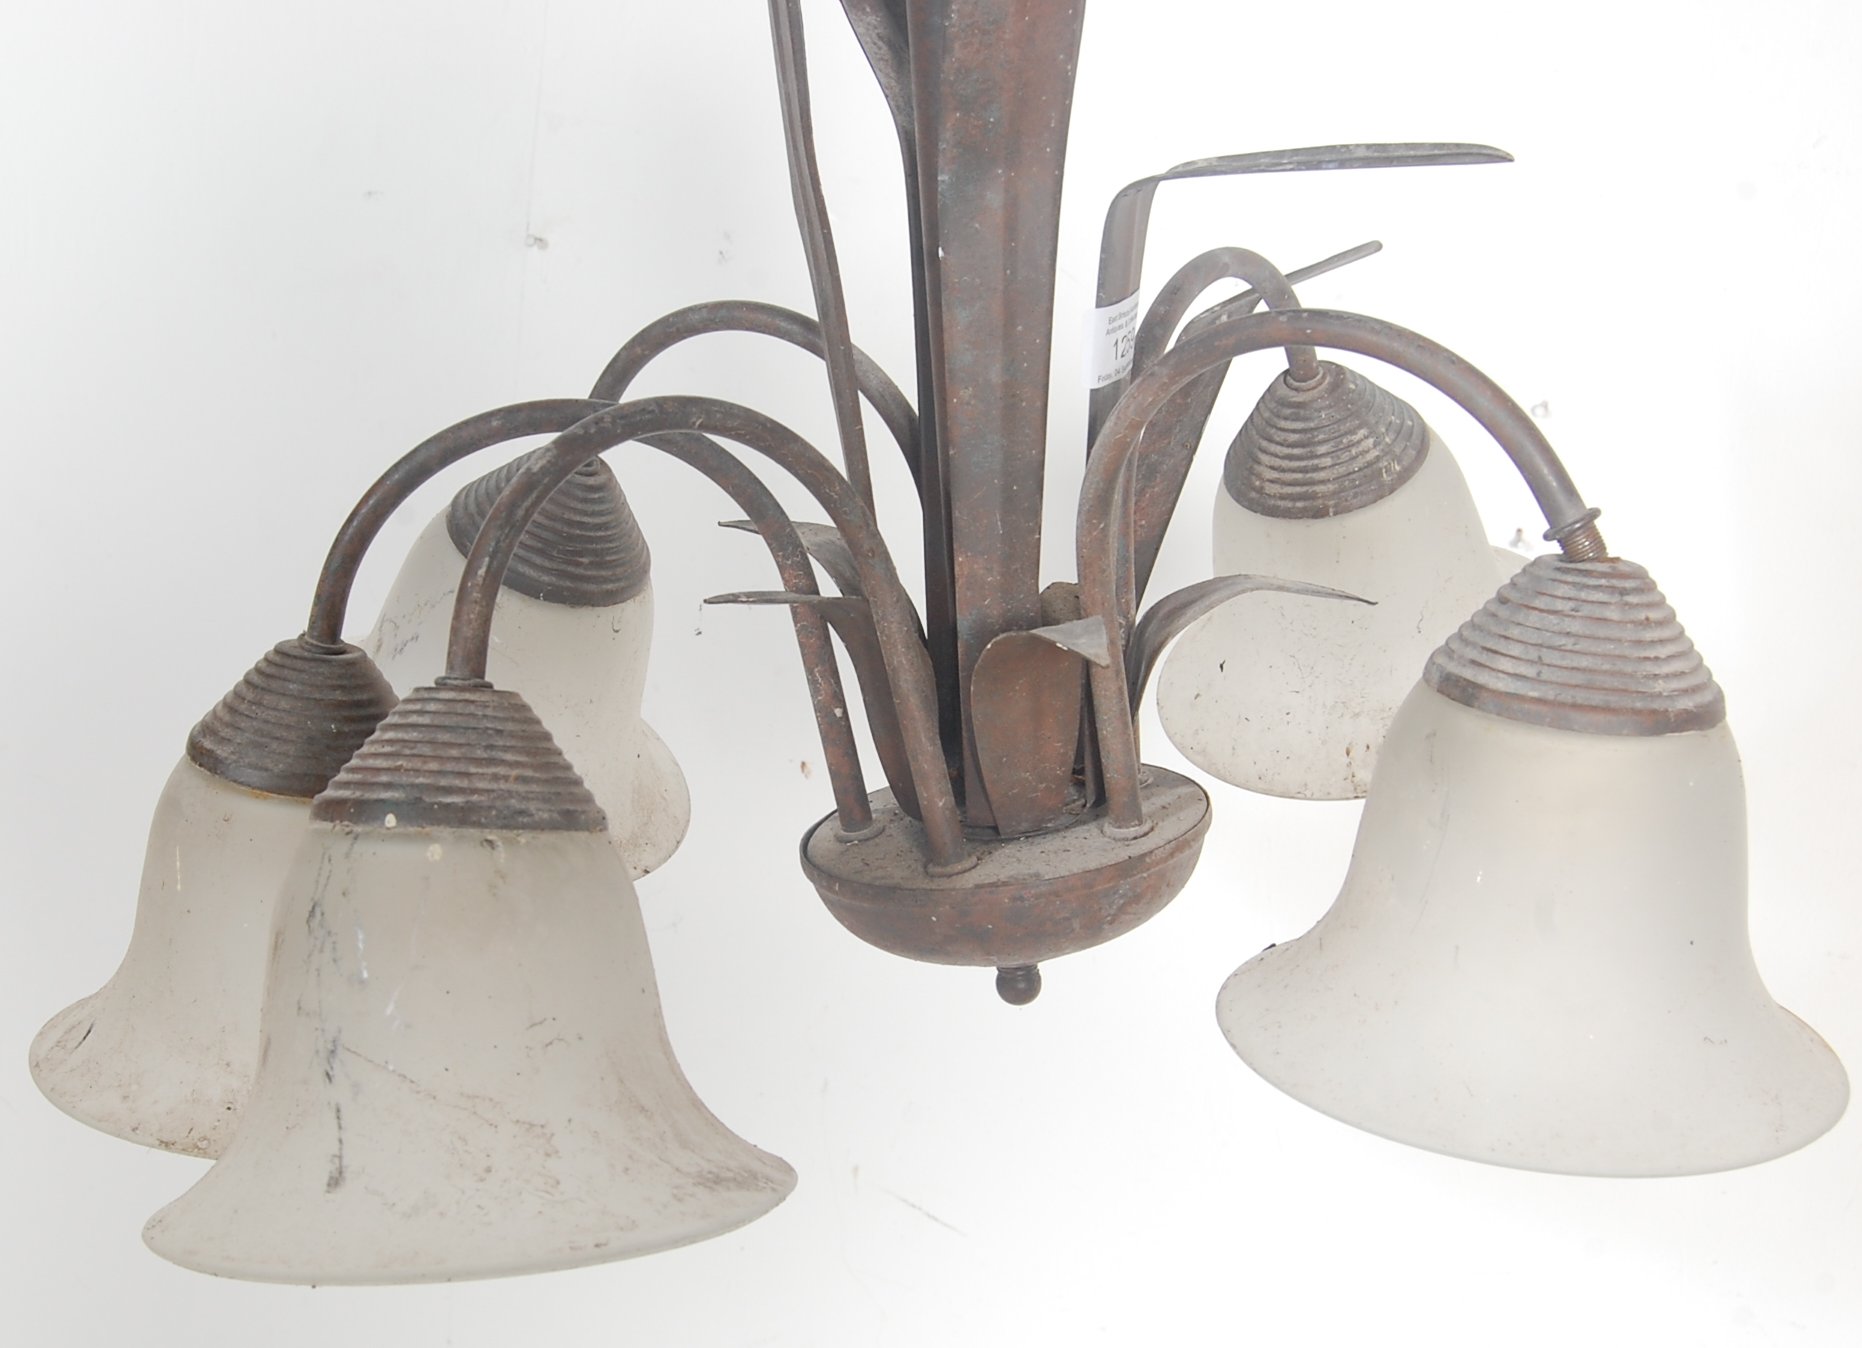 A 20th century antique style toleware chandelier - - Image 2 of 4